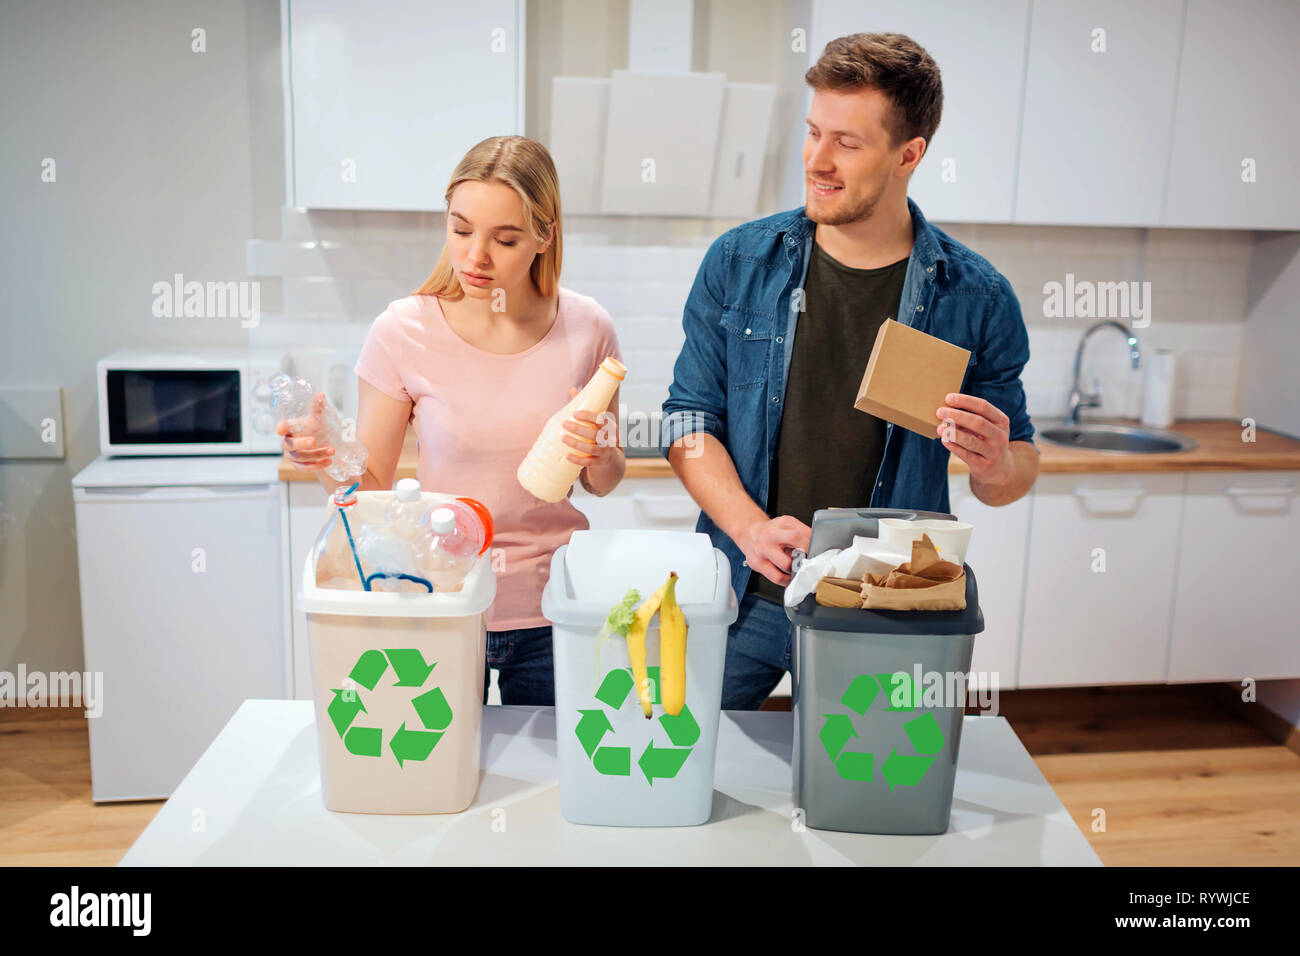 Waste sorting at home. Smiling young family putting plastic, paper, other waste in garbage bio bins in the kitchen Stock Photo